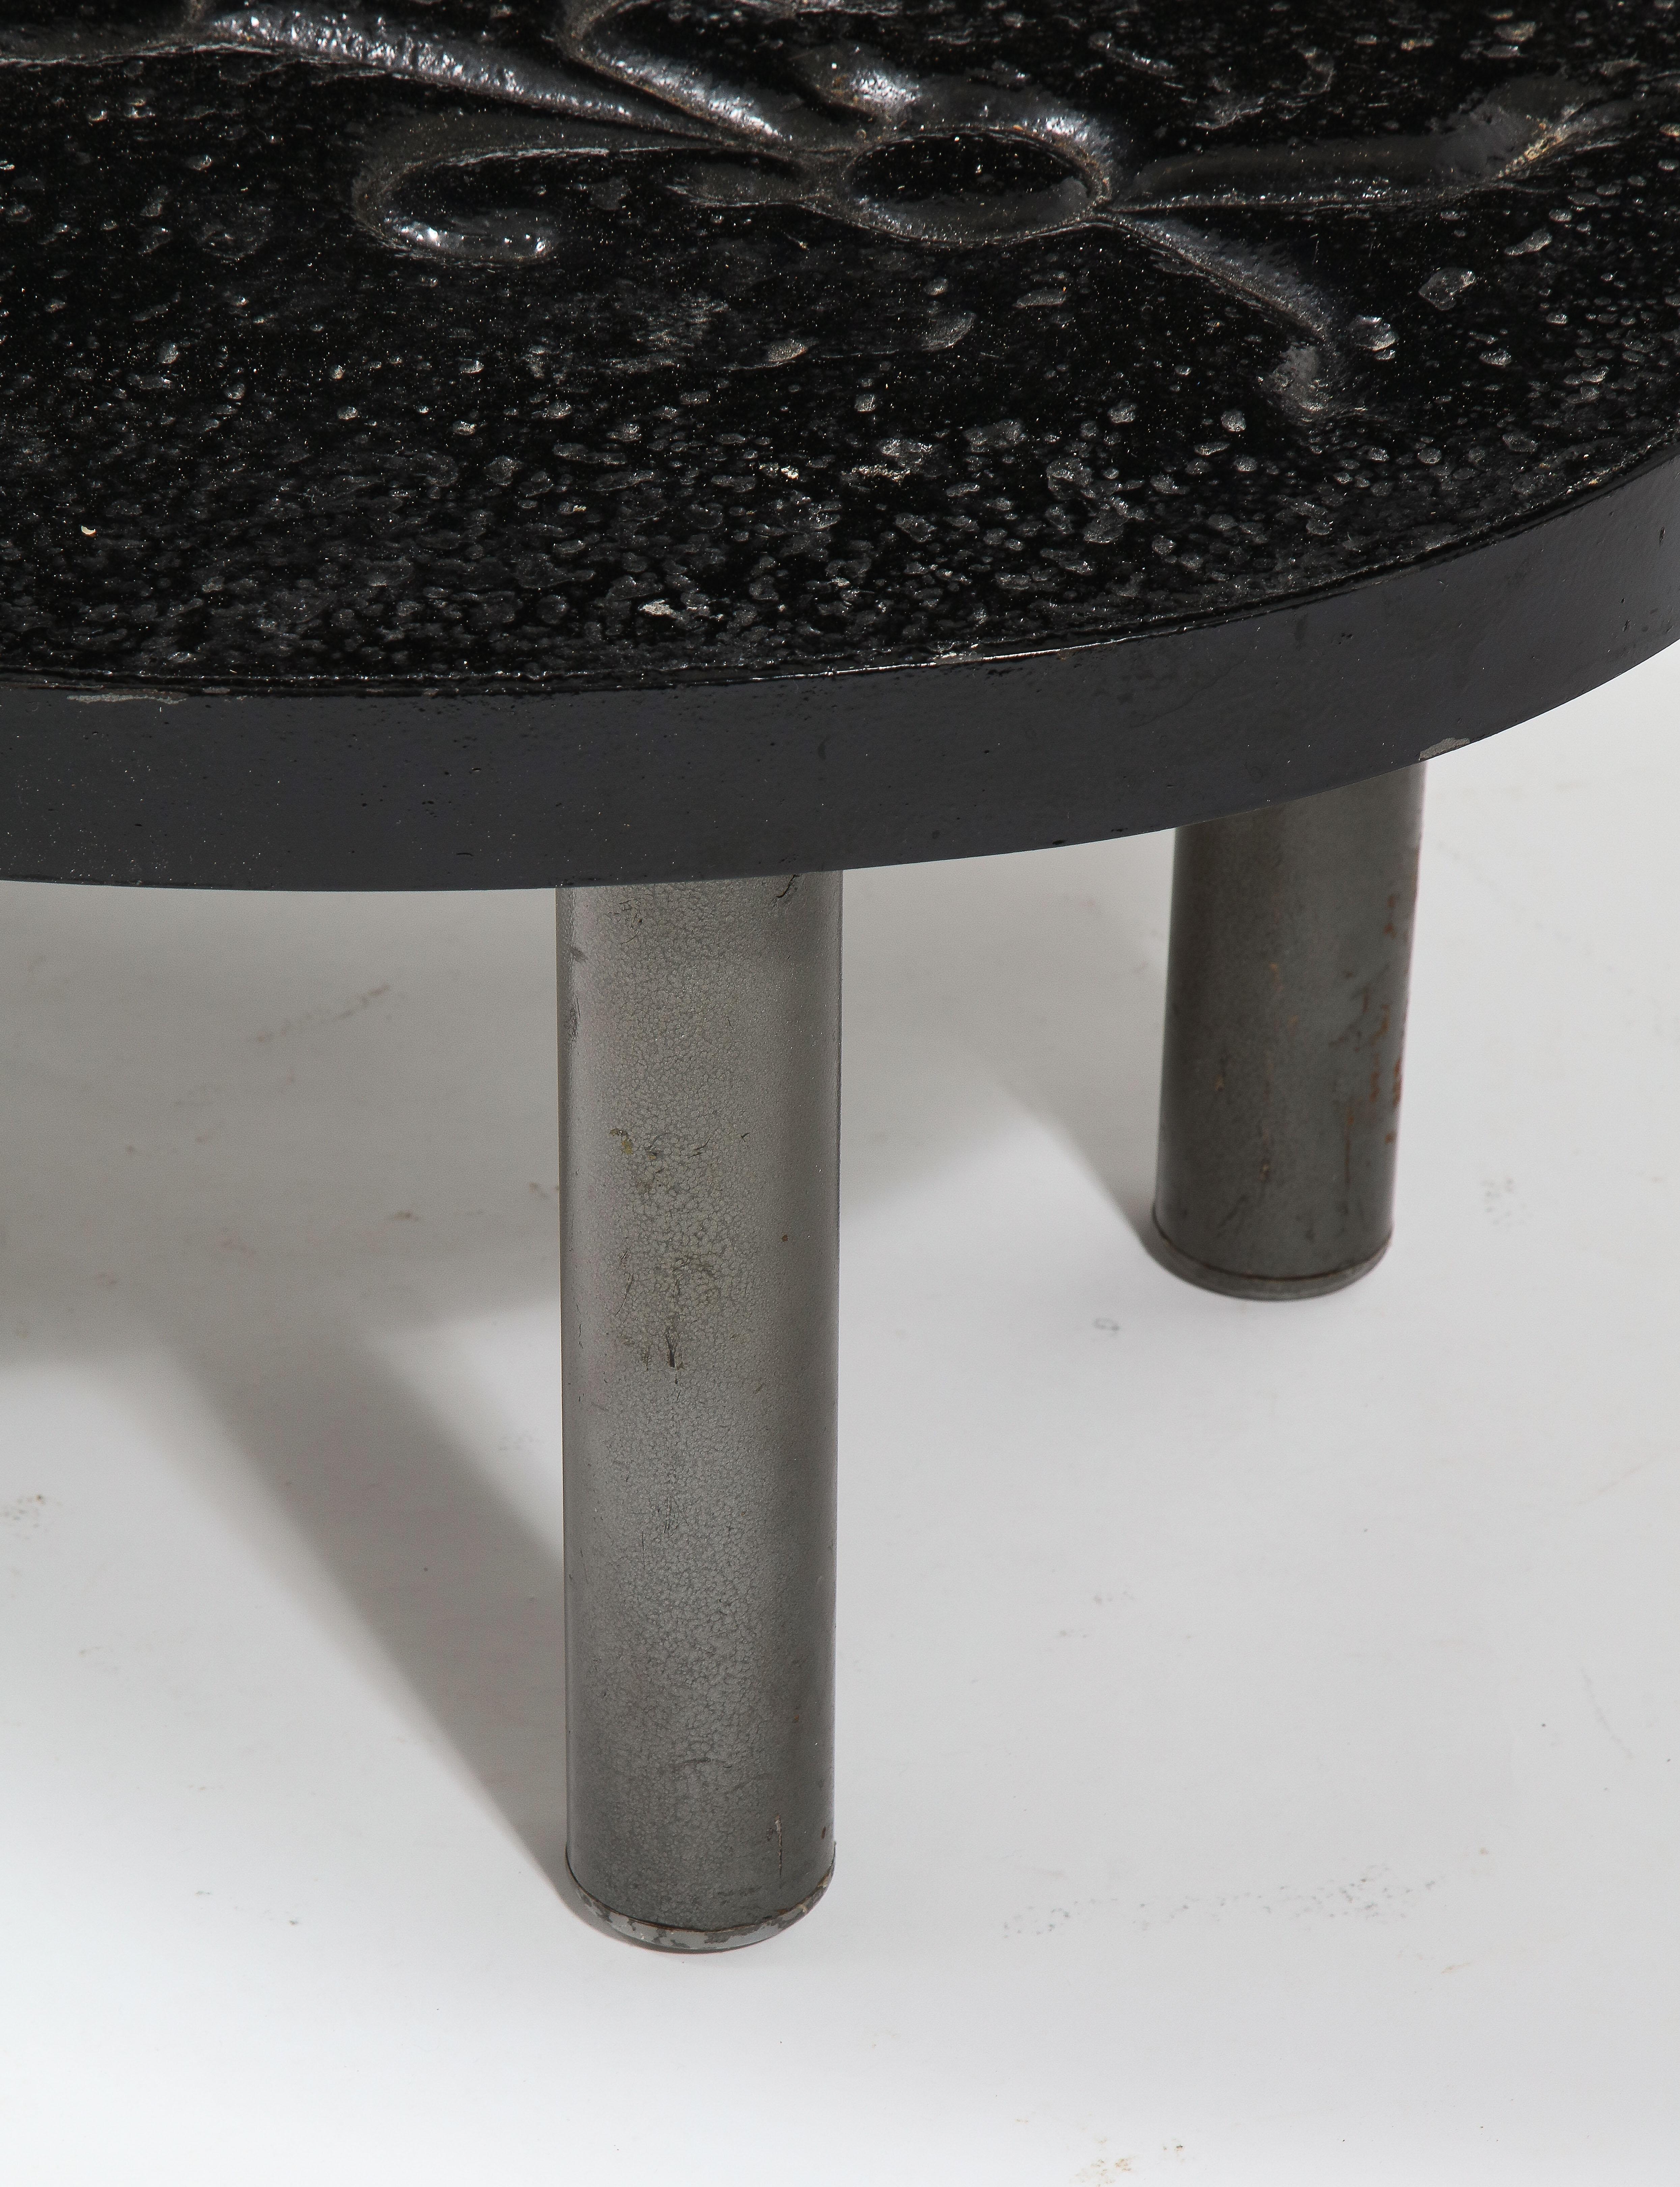 Steel French Enameled Lava Stone Small Coffee Table in Vallauris Style, France 1960's